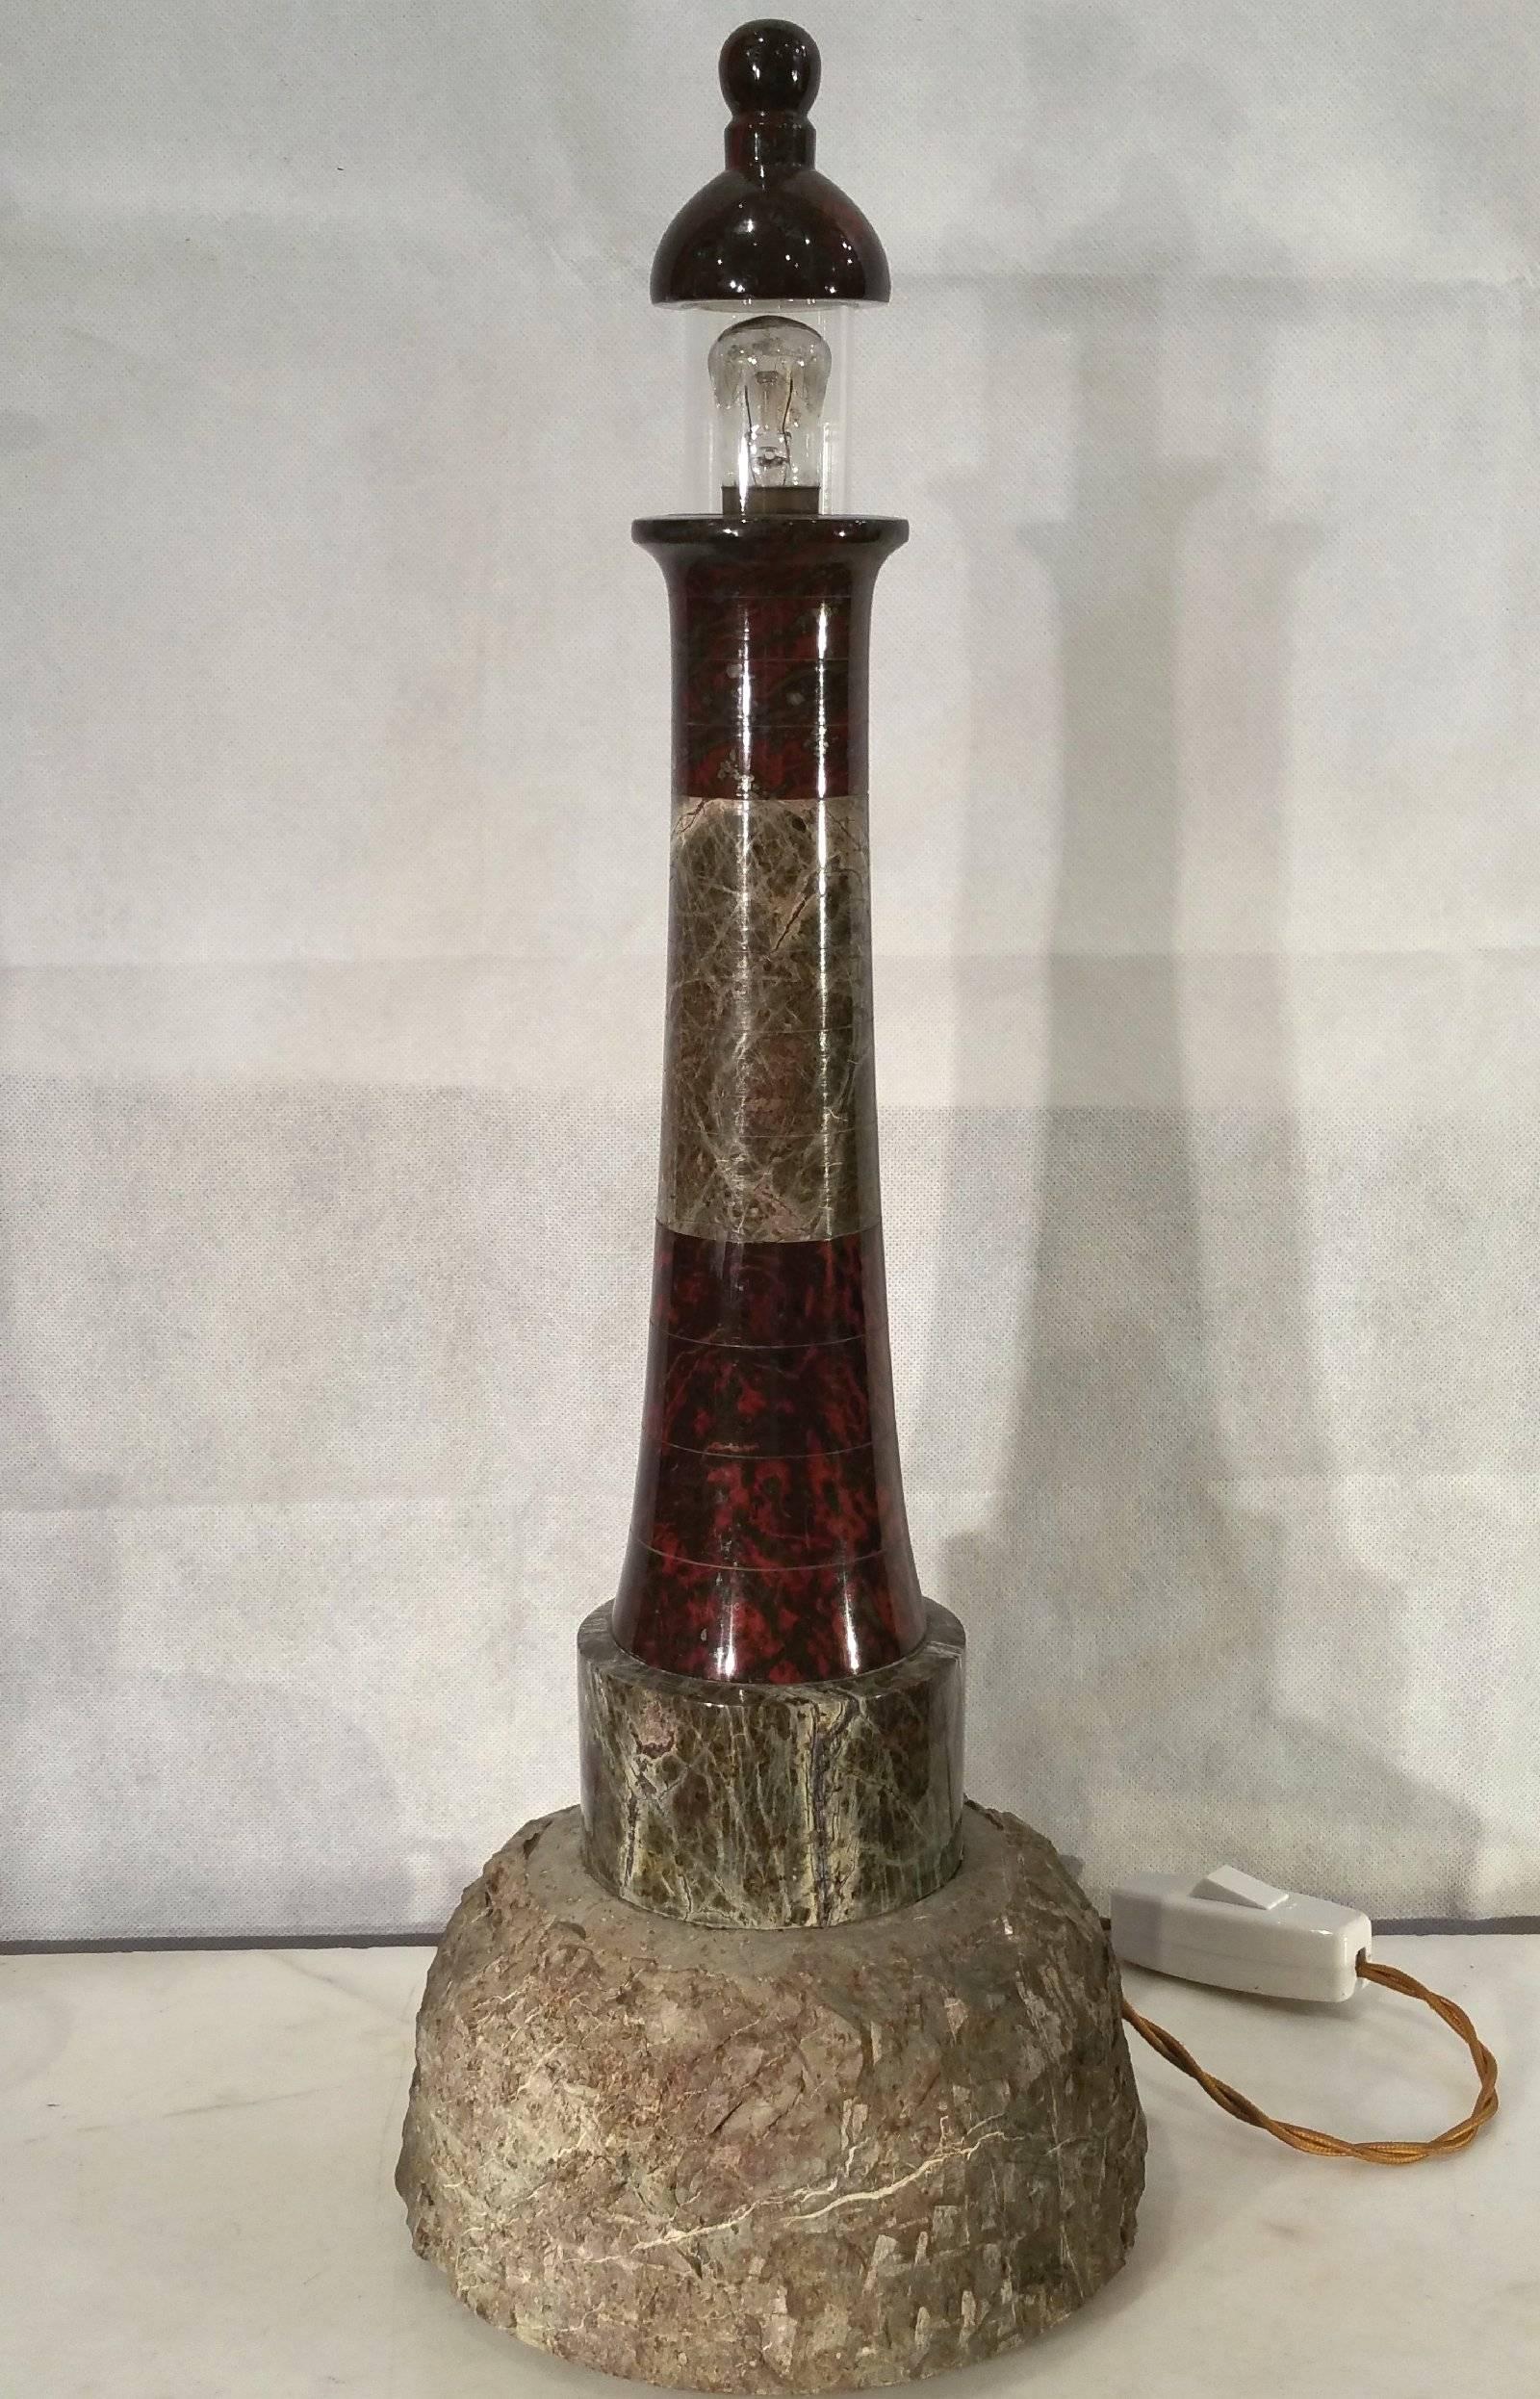 This lovely one of a kind table lamp designed in the shape of a lighthouse, was crafted by an unknown but talented artist, from Cornwall. The building is comprised of joined circular polished pieces of marble, in graduating widths, set on a roughly